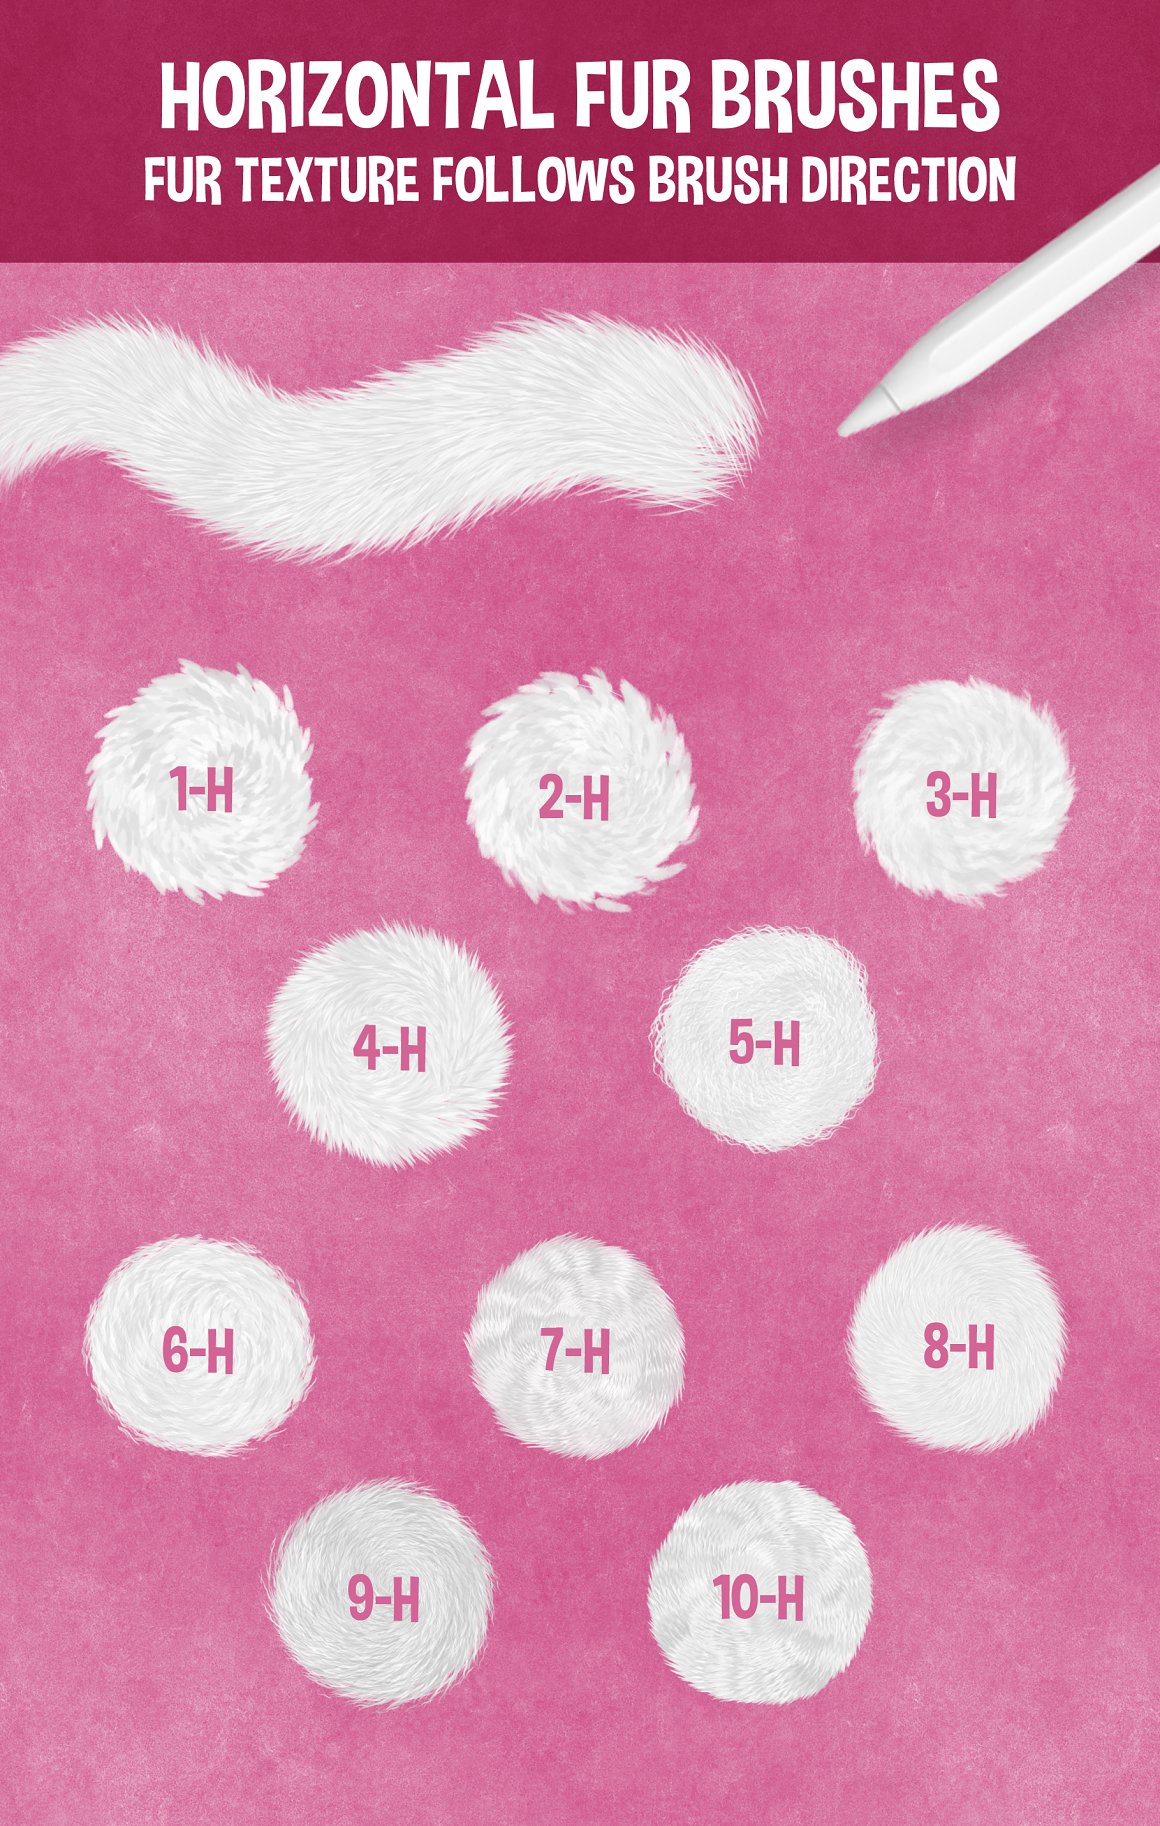 White collection of 10-H fur brushes on a pink background.